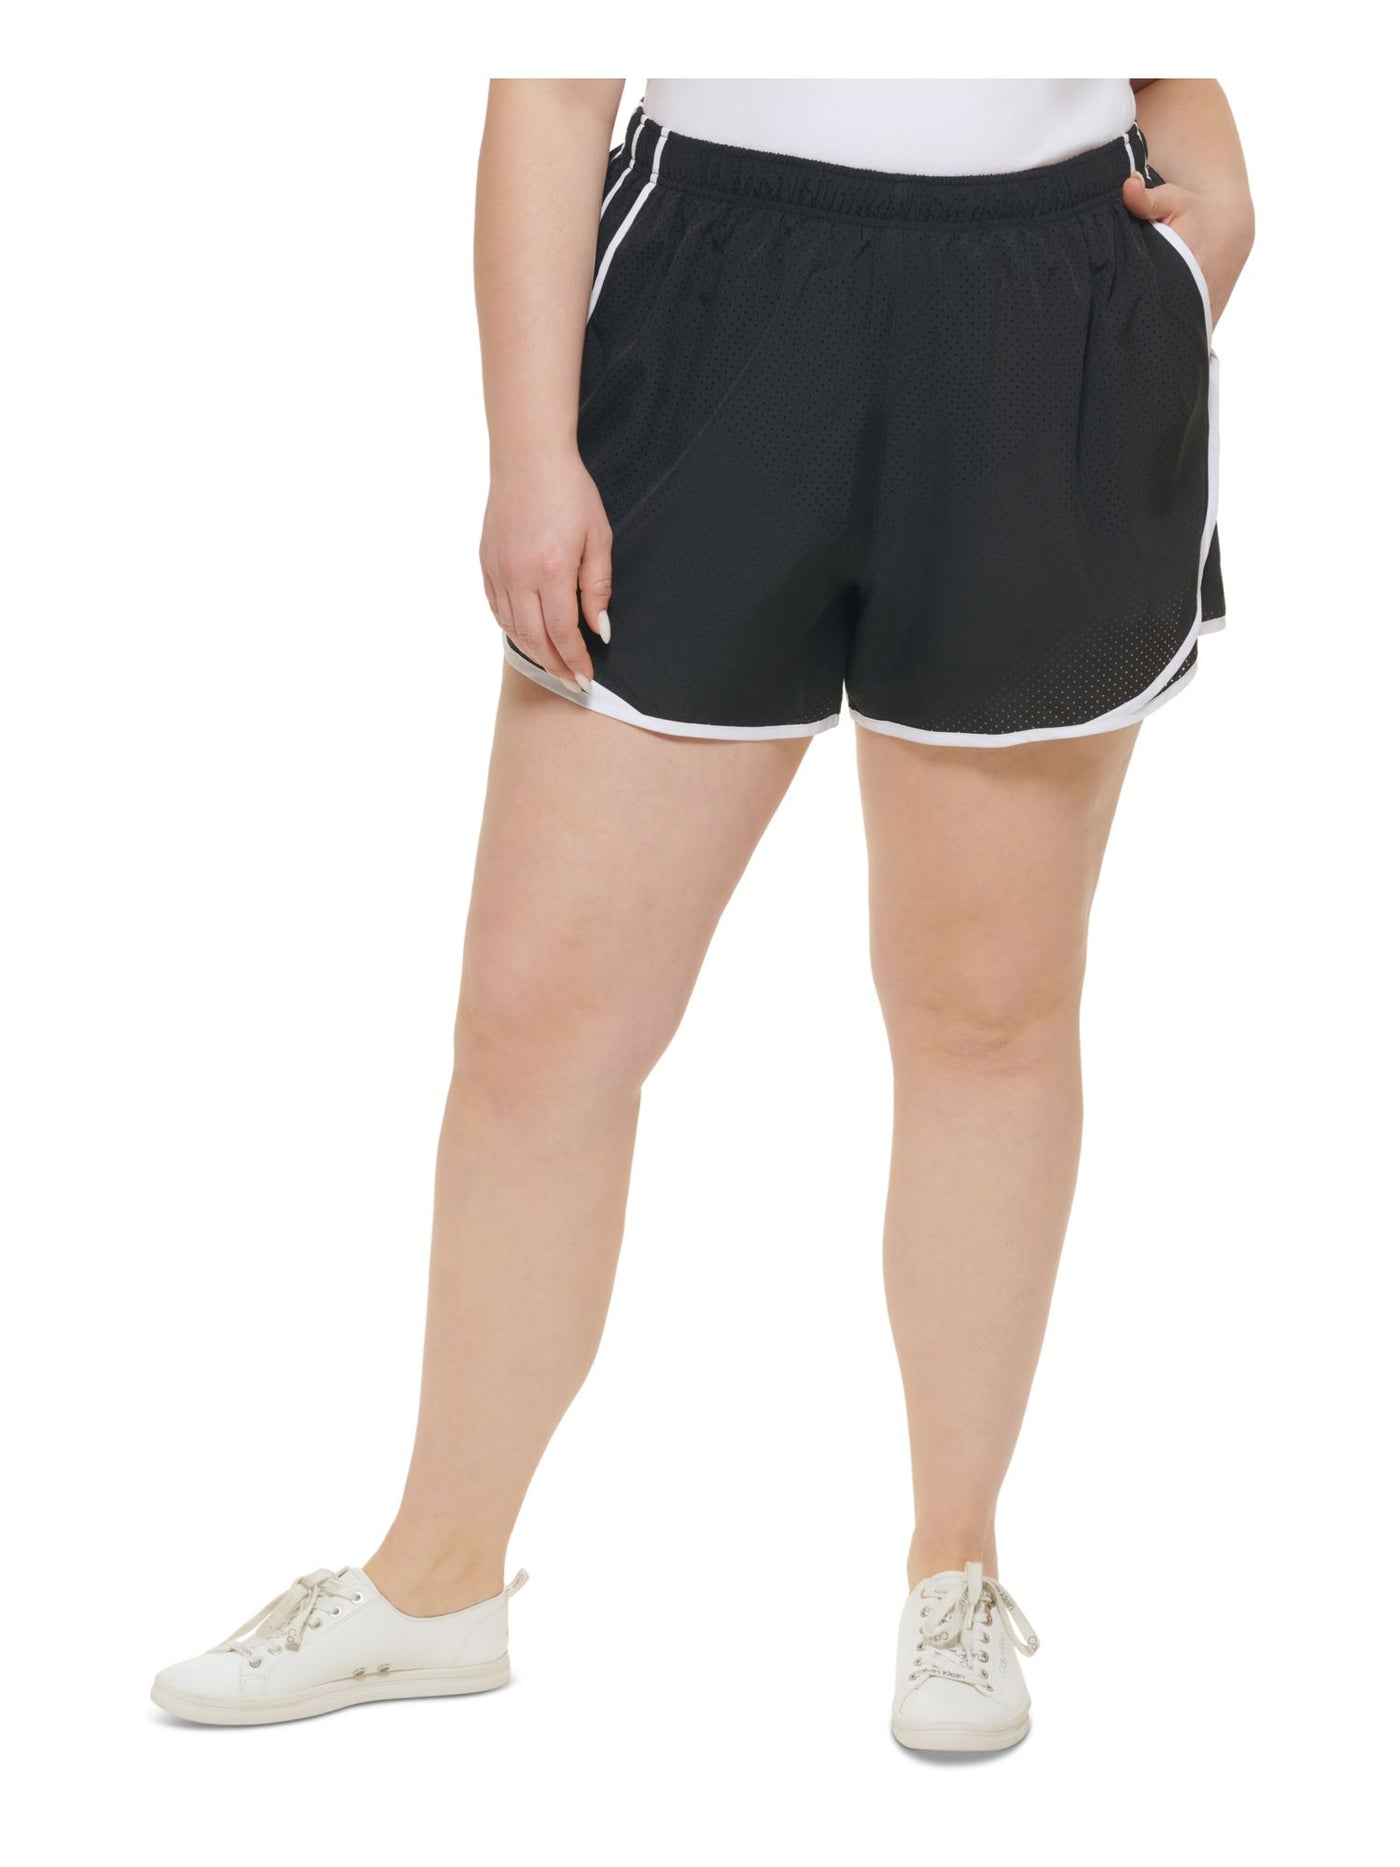 CALVIN KLEIN PERFORMANCE Womens Black Pocketed Interior Mesh Liner Pull On Color Block Active Wear Shorts Shorts 2X